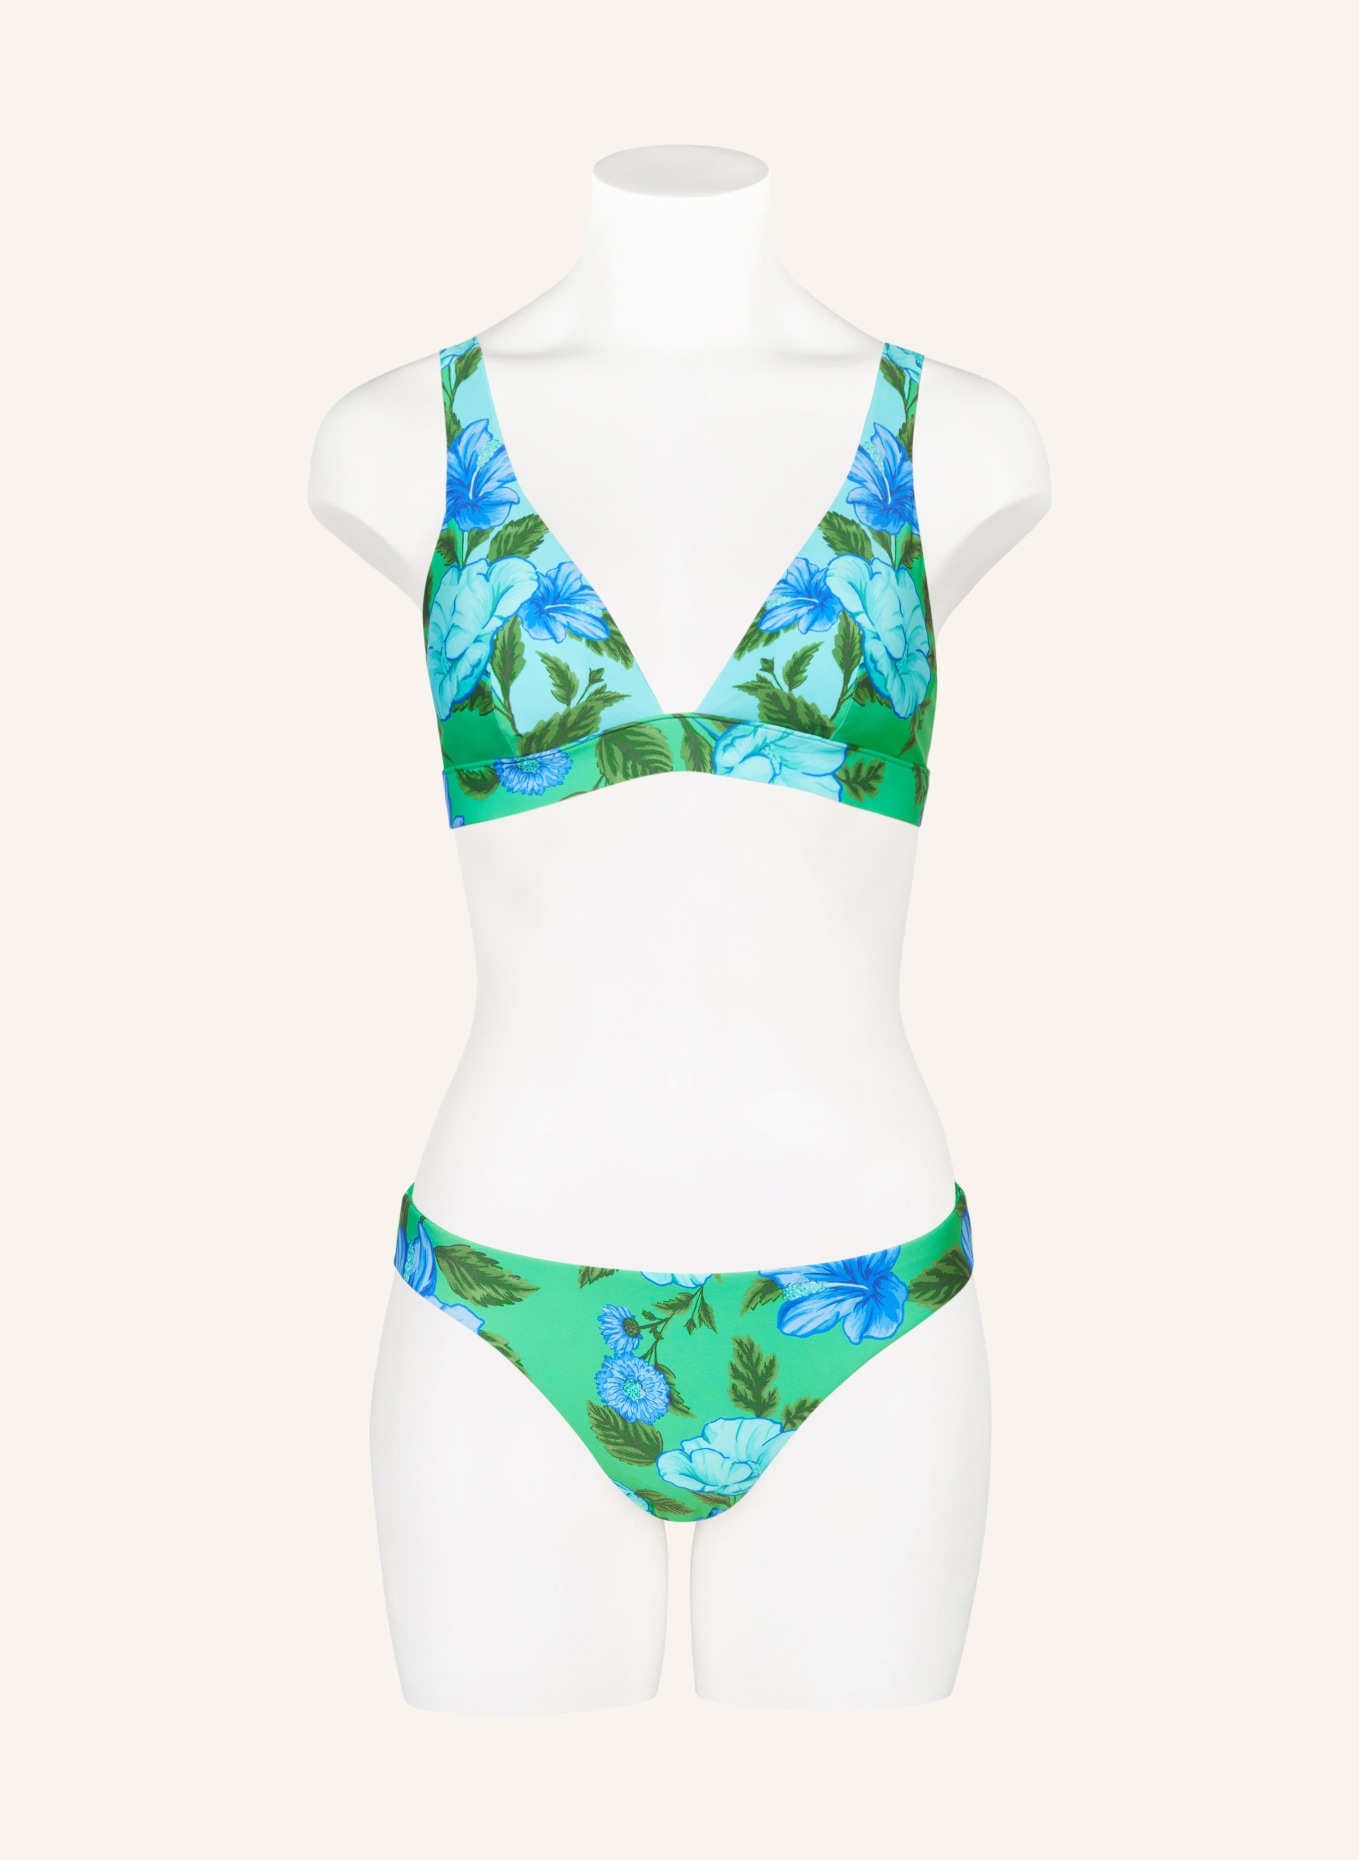 SEAFOLLY Bralette bikini top GARDEN PARTY, Color: LIGHT GREEN/ TURQUOISE/ BLUE (Image 2)